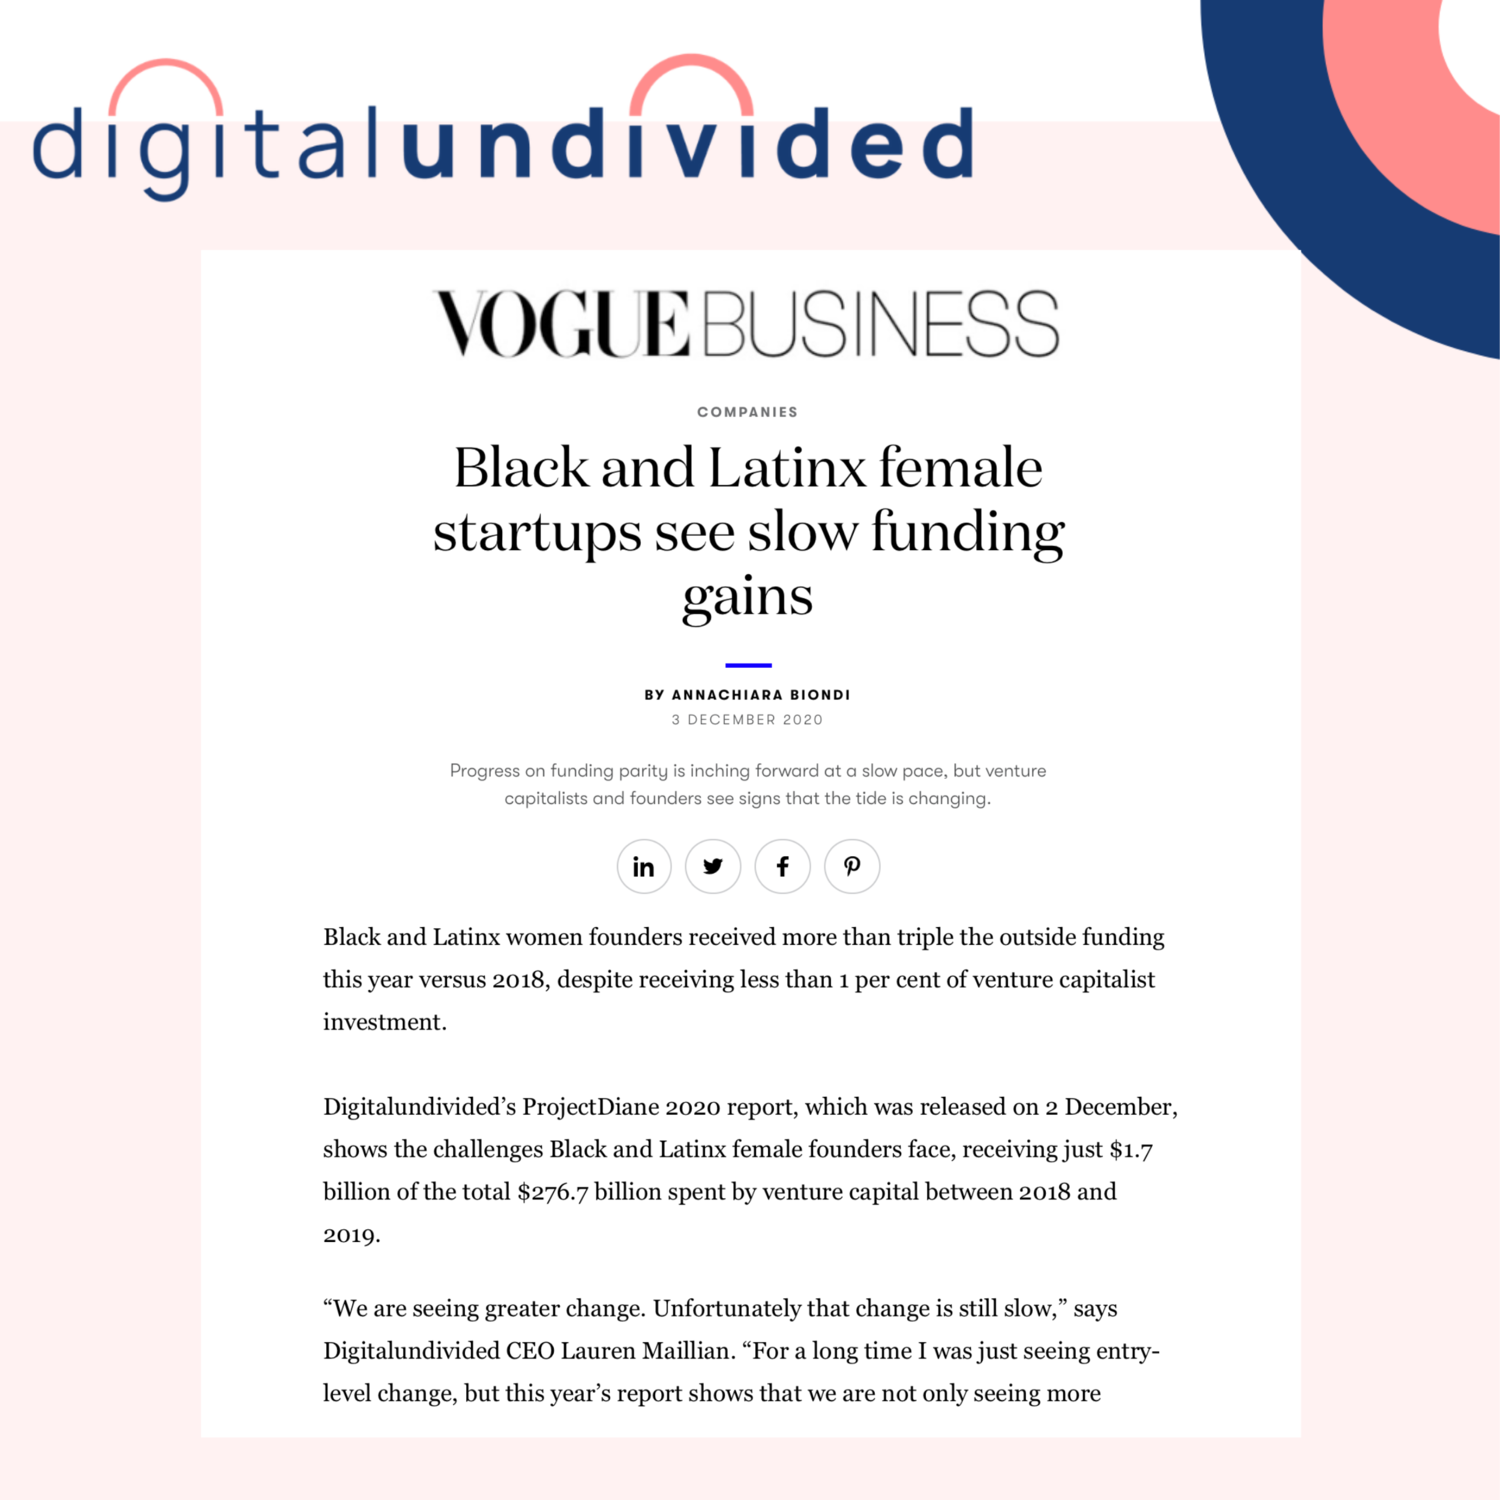 Black and Latinx female startups see slow funding gains